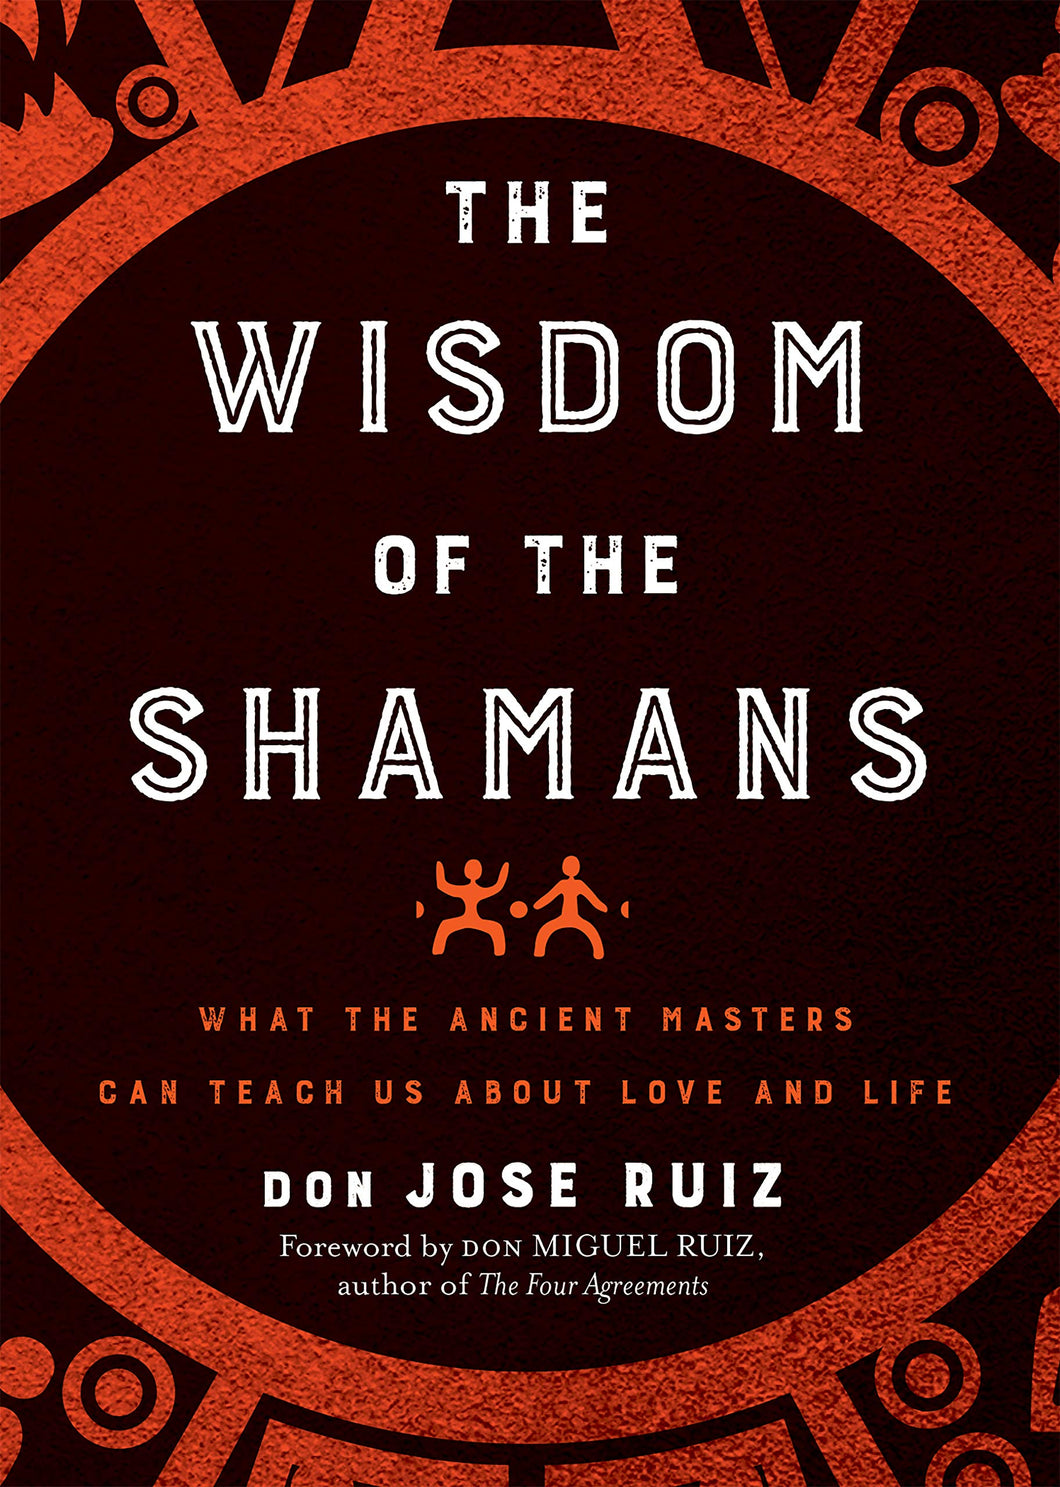 Wisdom of the Shamans: What the Ancient Masters Can Teach Us about Love and Life by Don Jose Ruiz